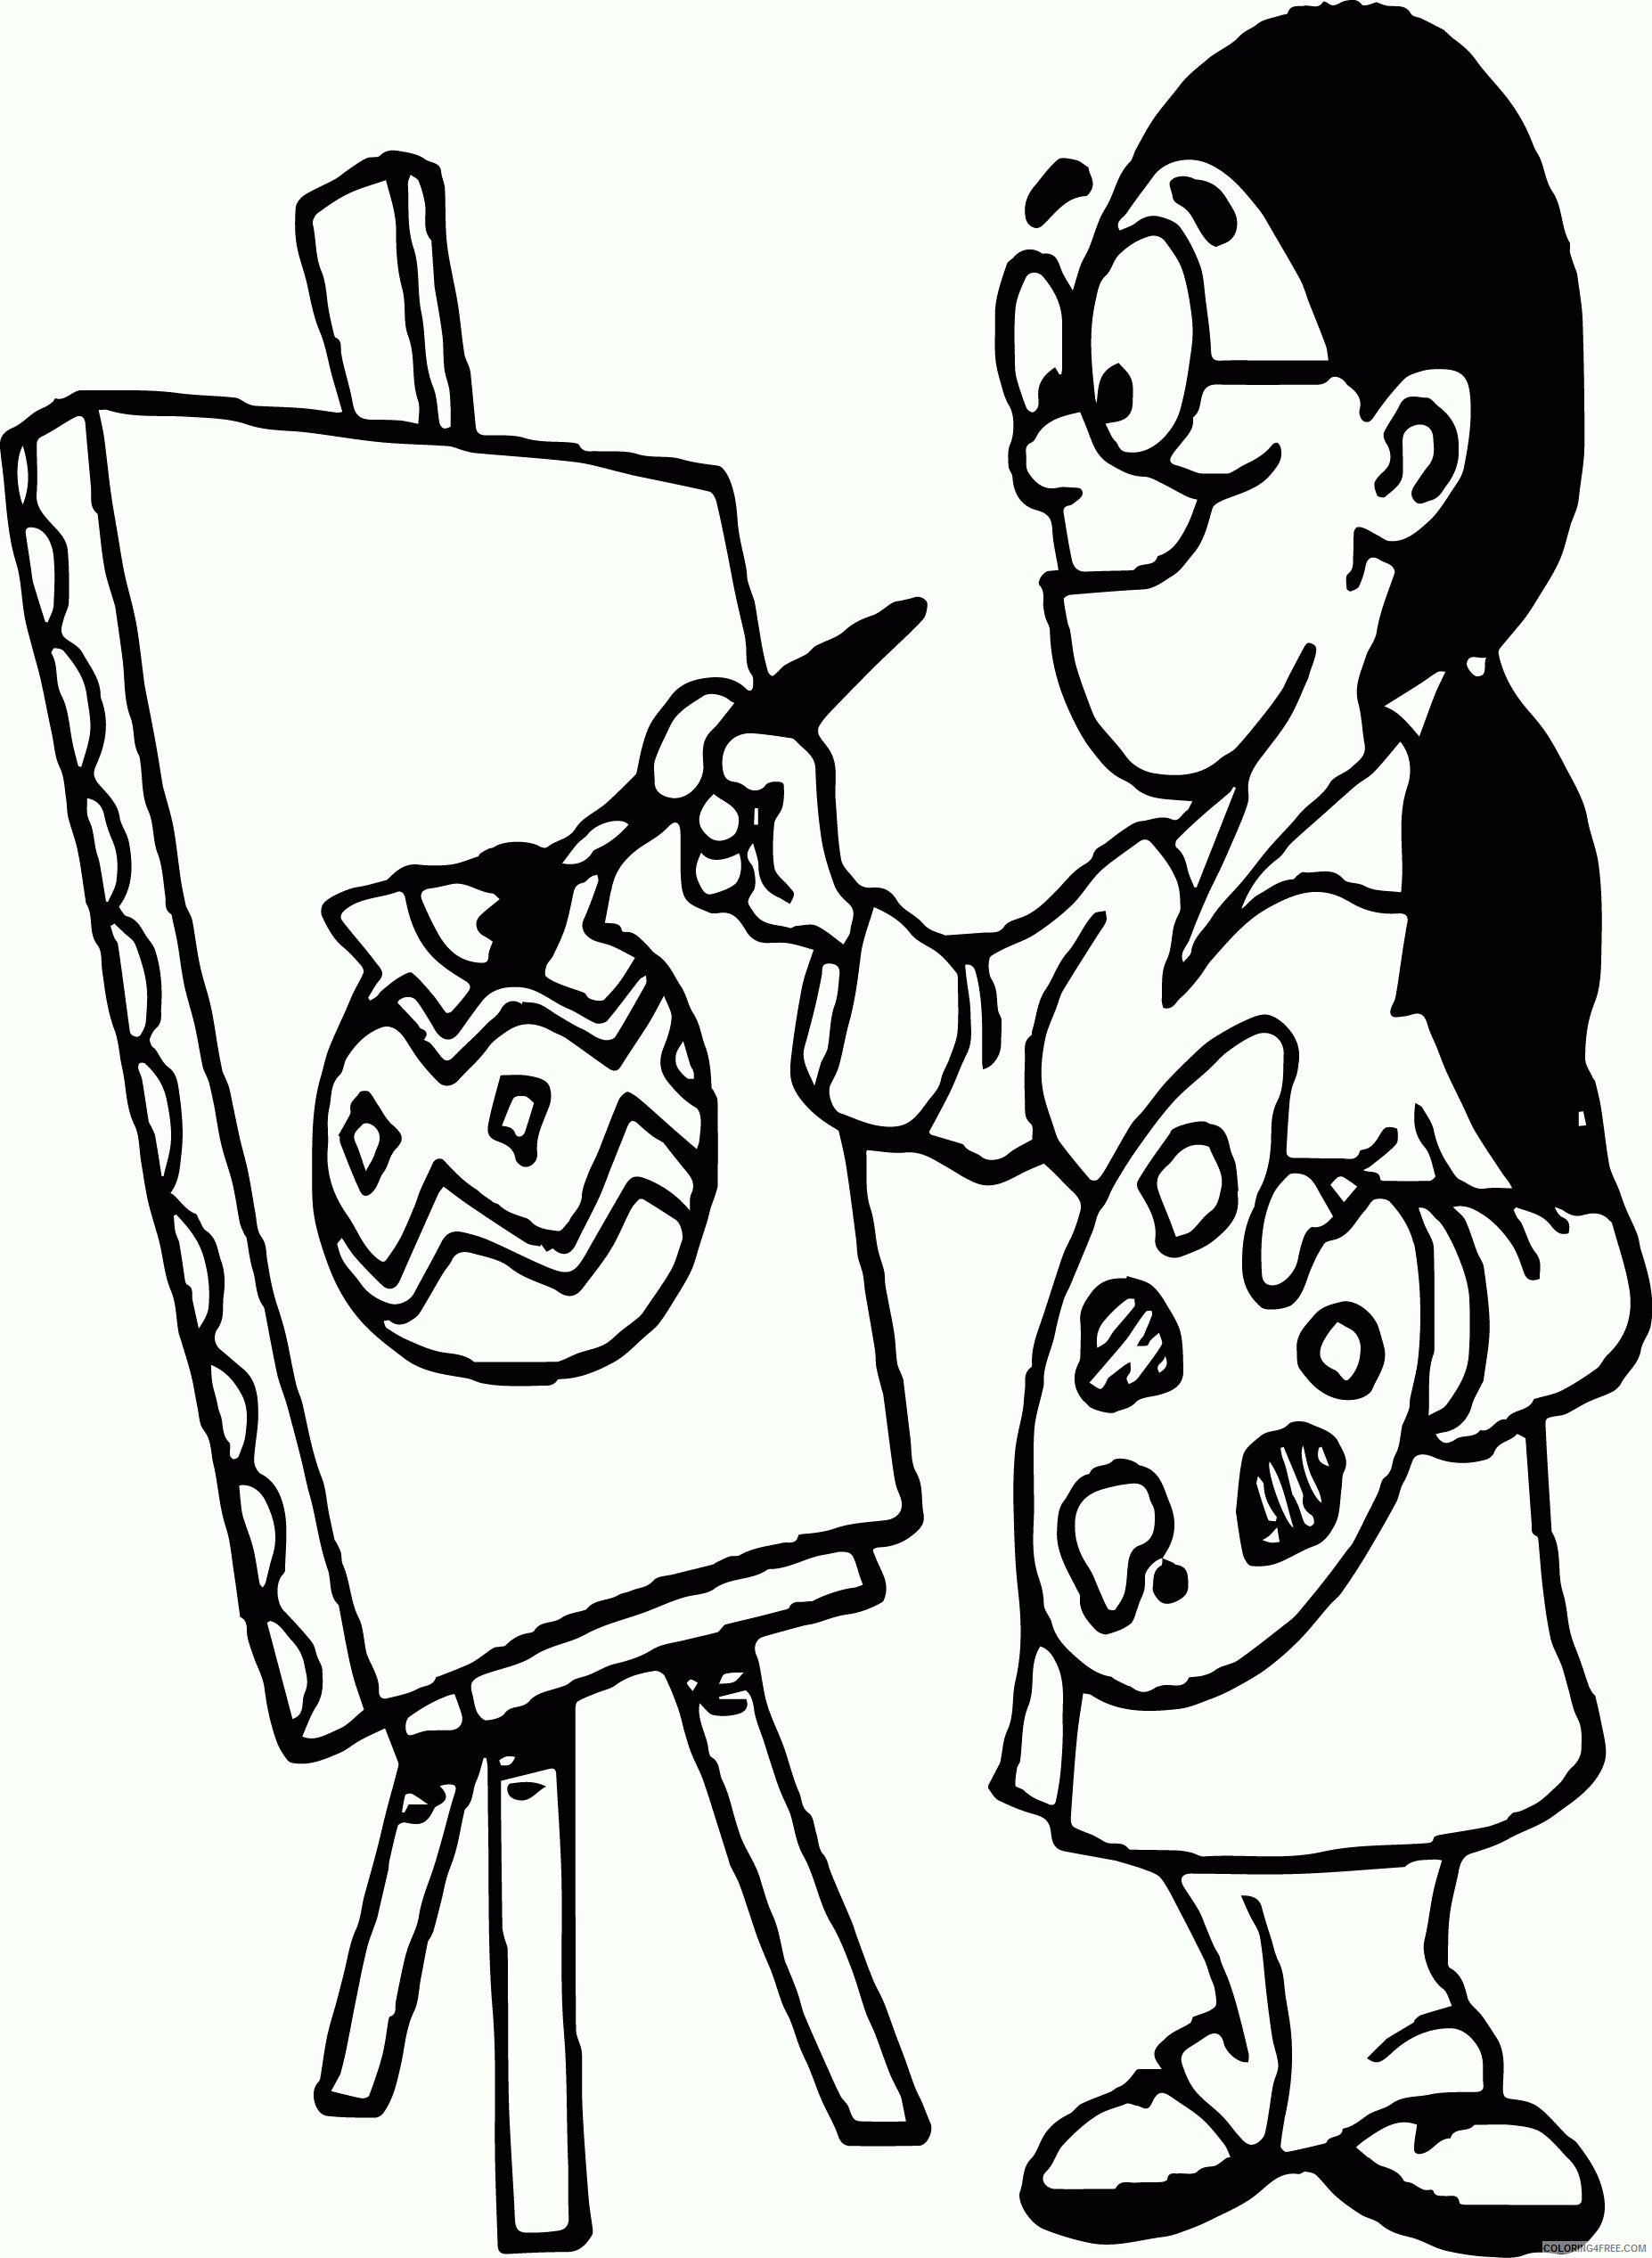 A Student Is Painting For Kids Coloring Page